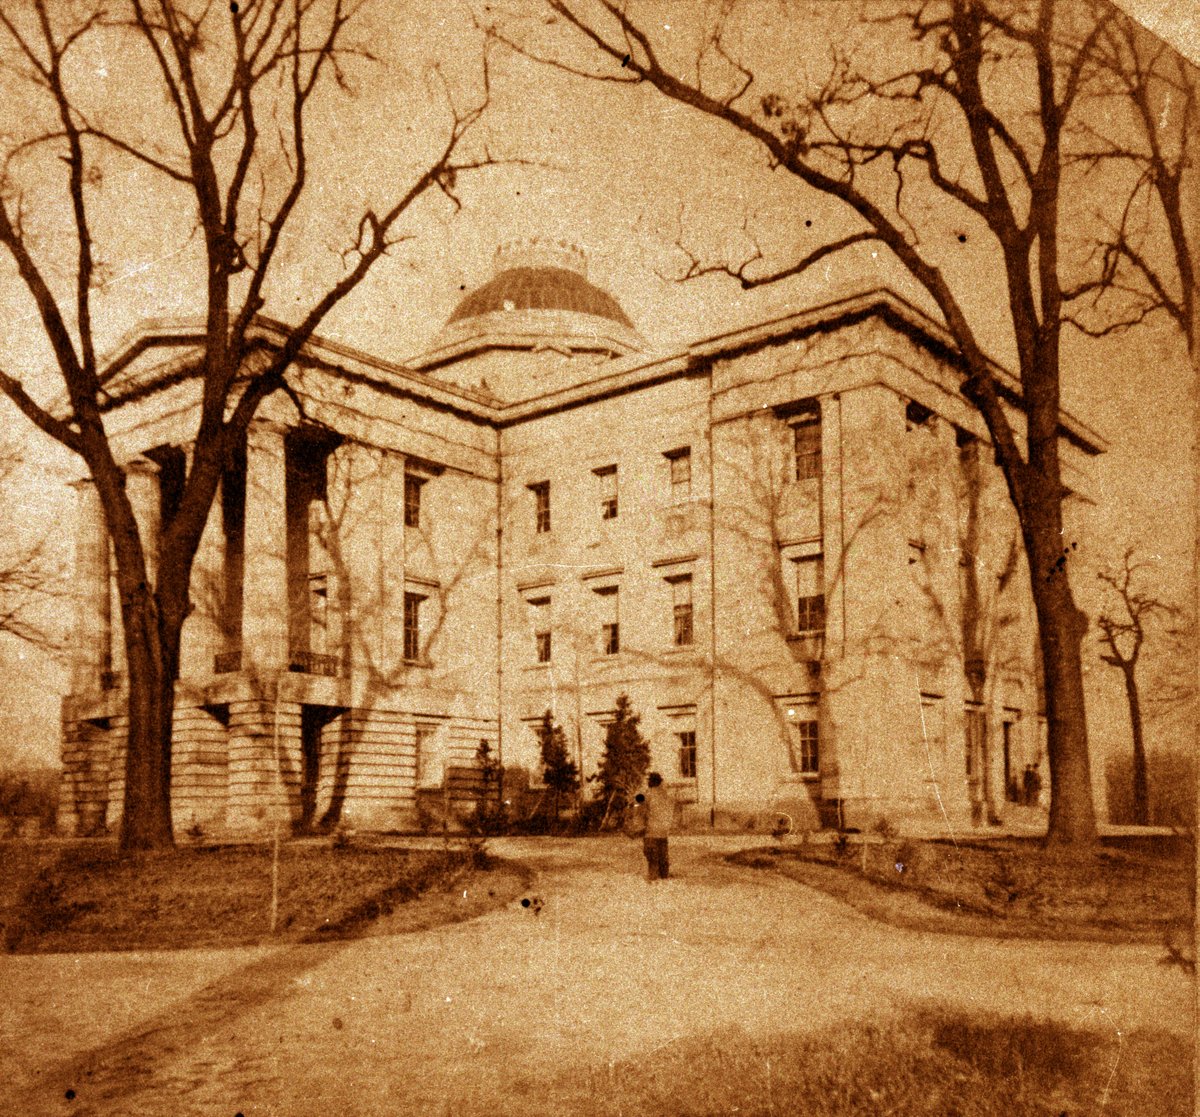 Today we officially launch a new digital humanities project that names and shares the stories of the 130+ enslaved African American men who built, maintained, and worked in the NC State Capitol 1833-1865. We invite you to visit namingtoknowing.org #BlackHistoryMonth